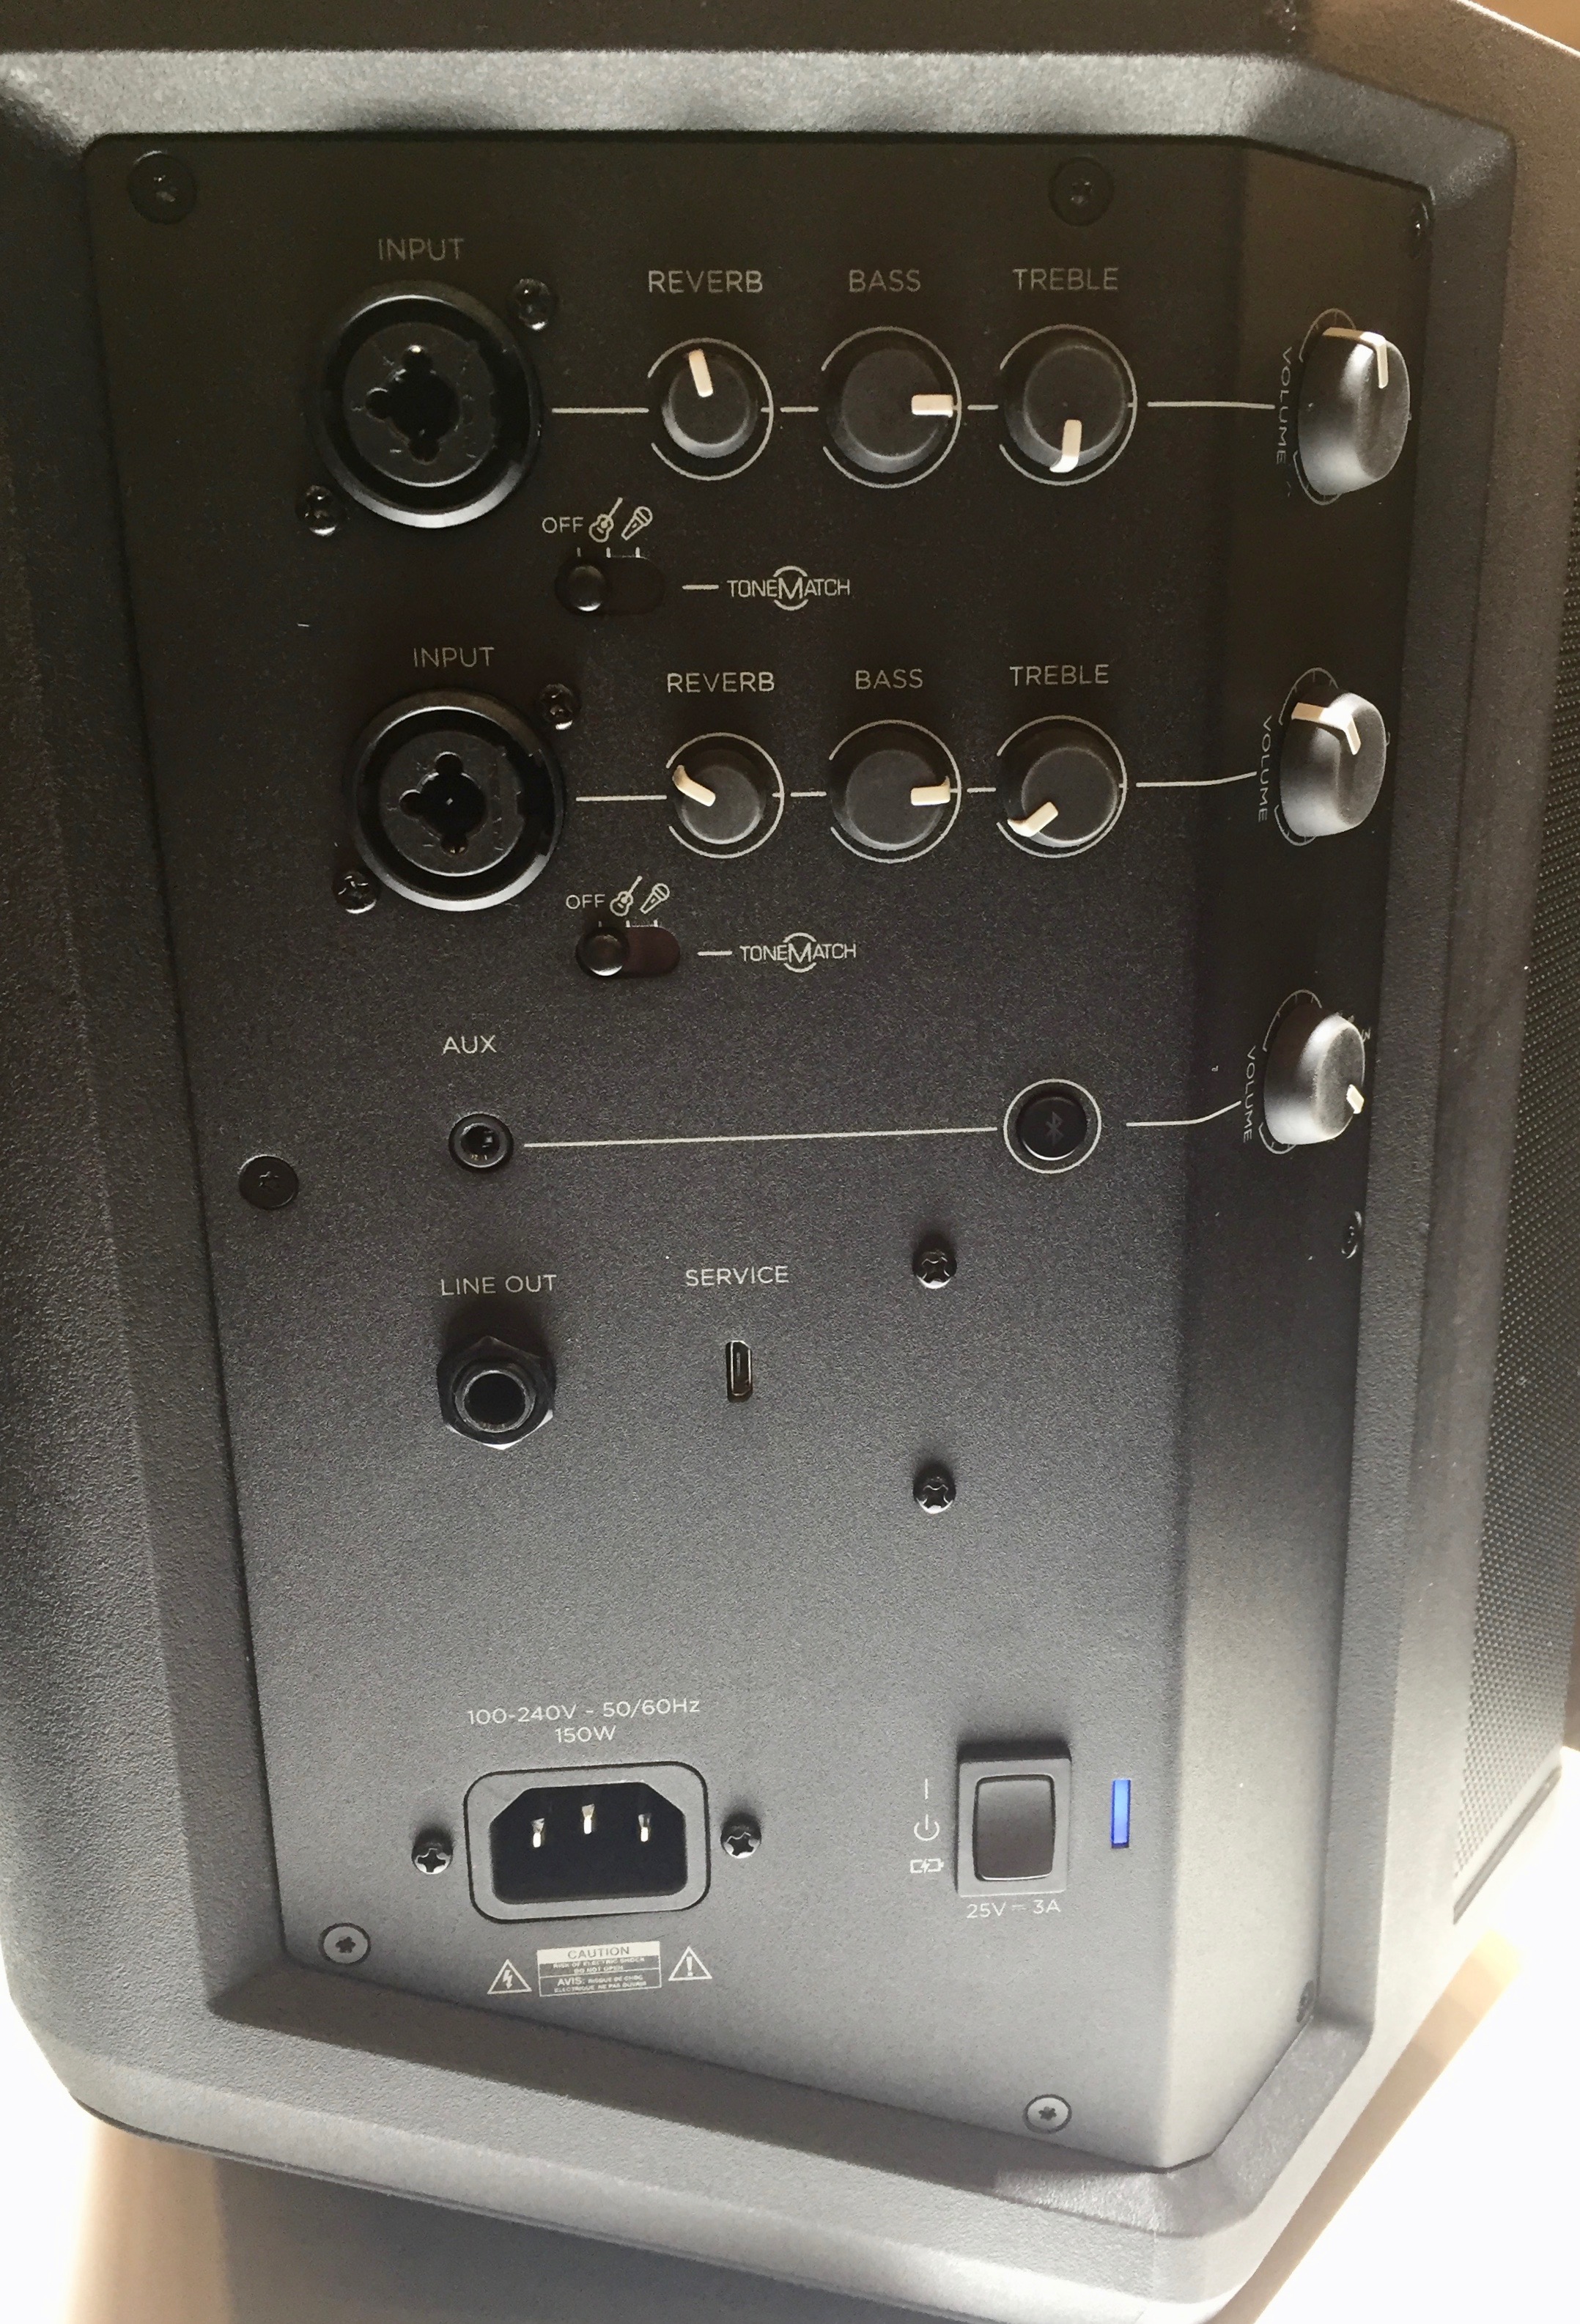 The Bose S1 Pro has a three-channel mixer built into its side.